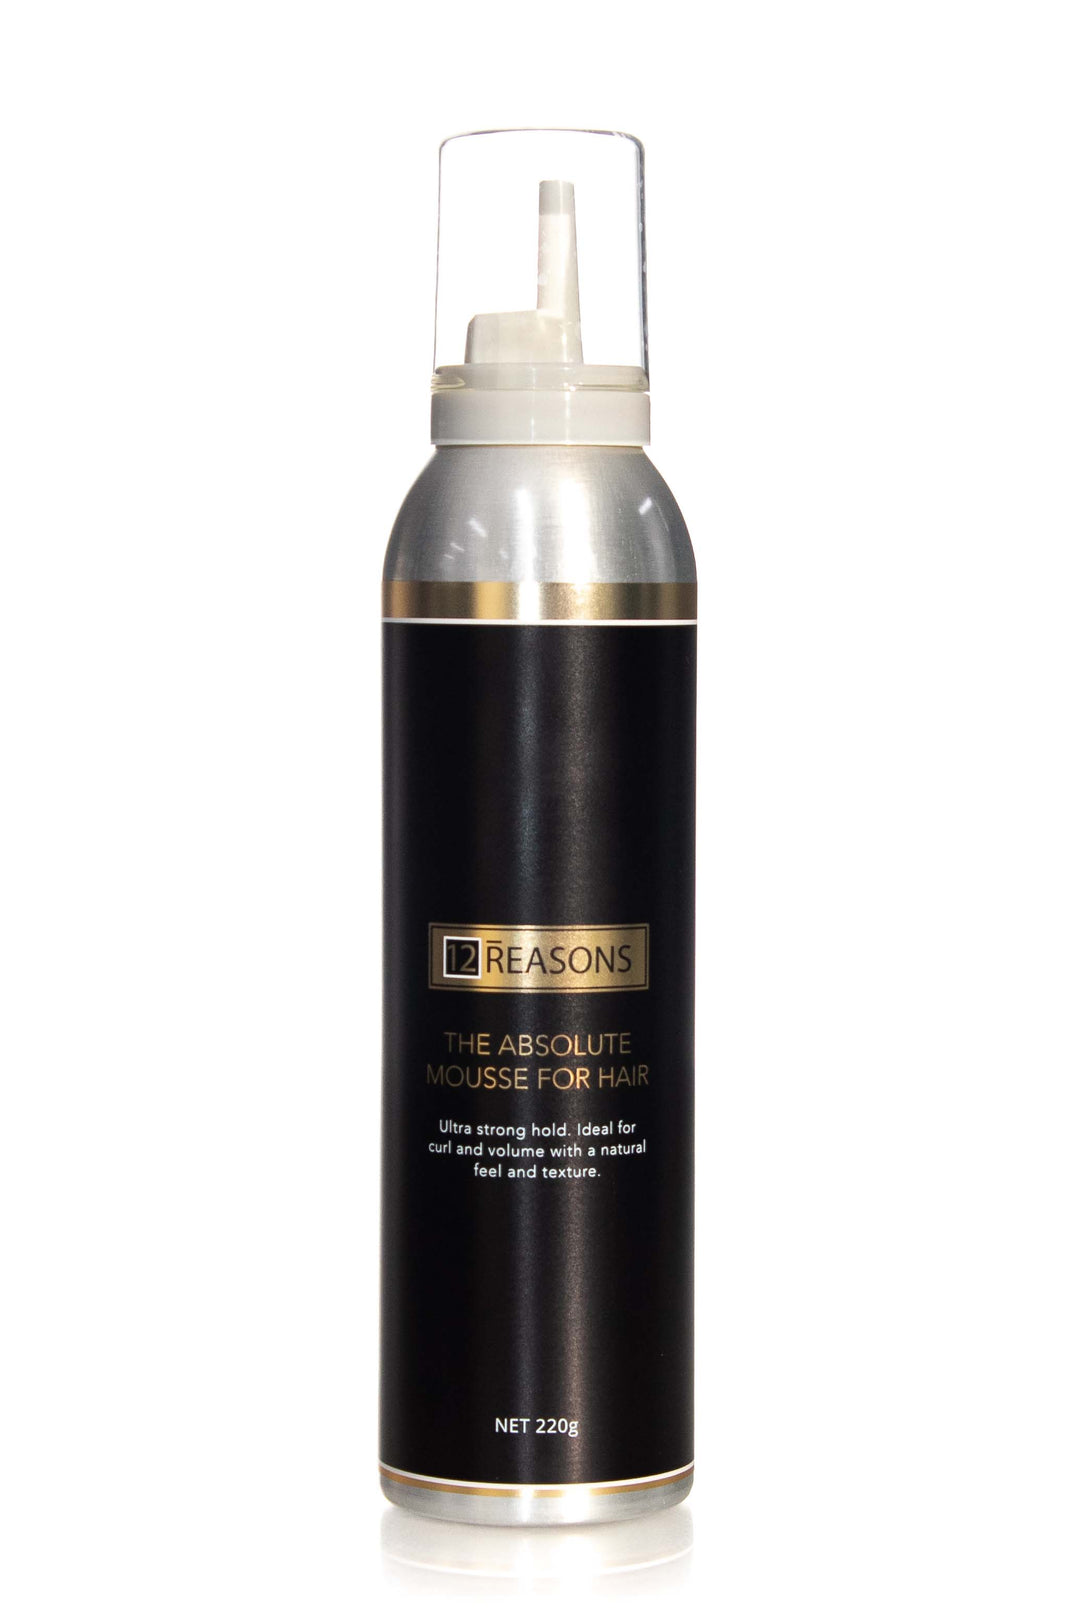 12 REASONS THE ABSOLUTE MOUSSE FOR HAIR 220G